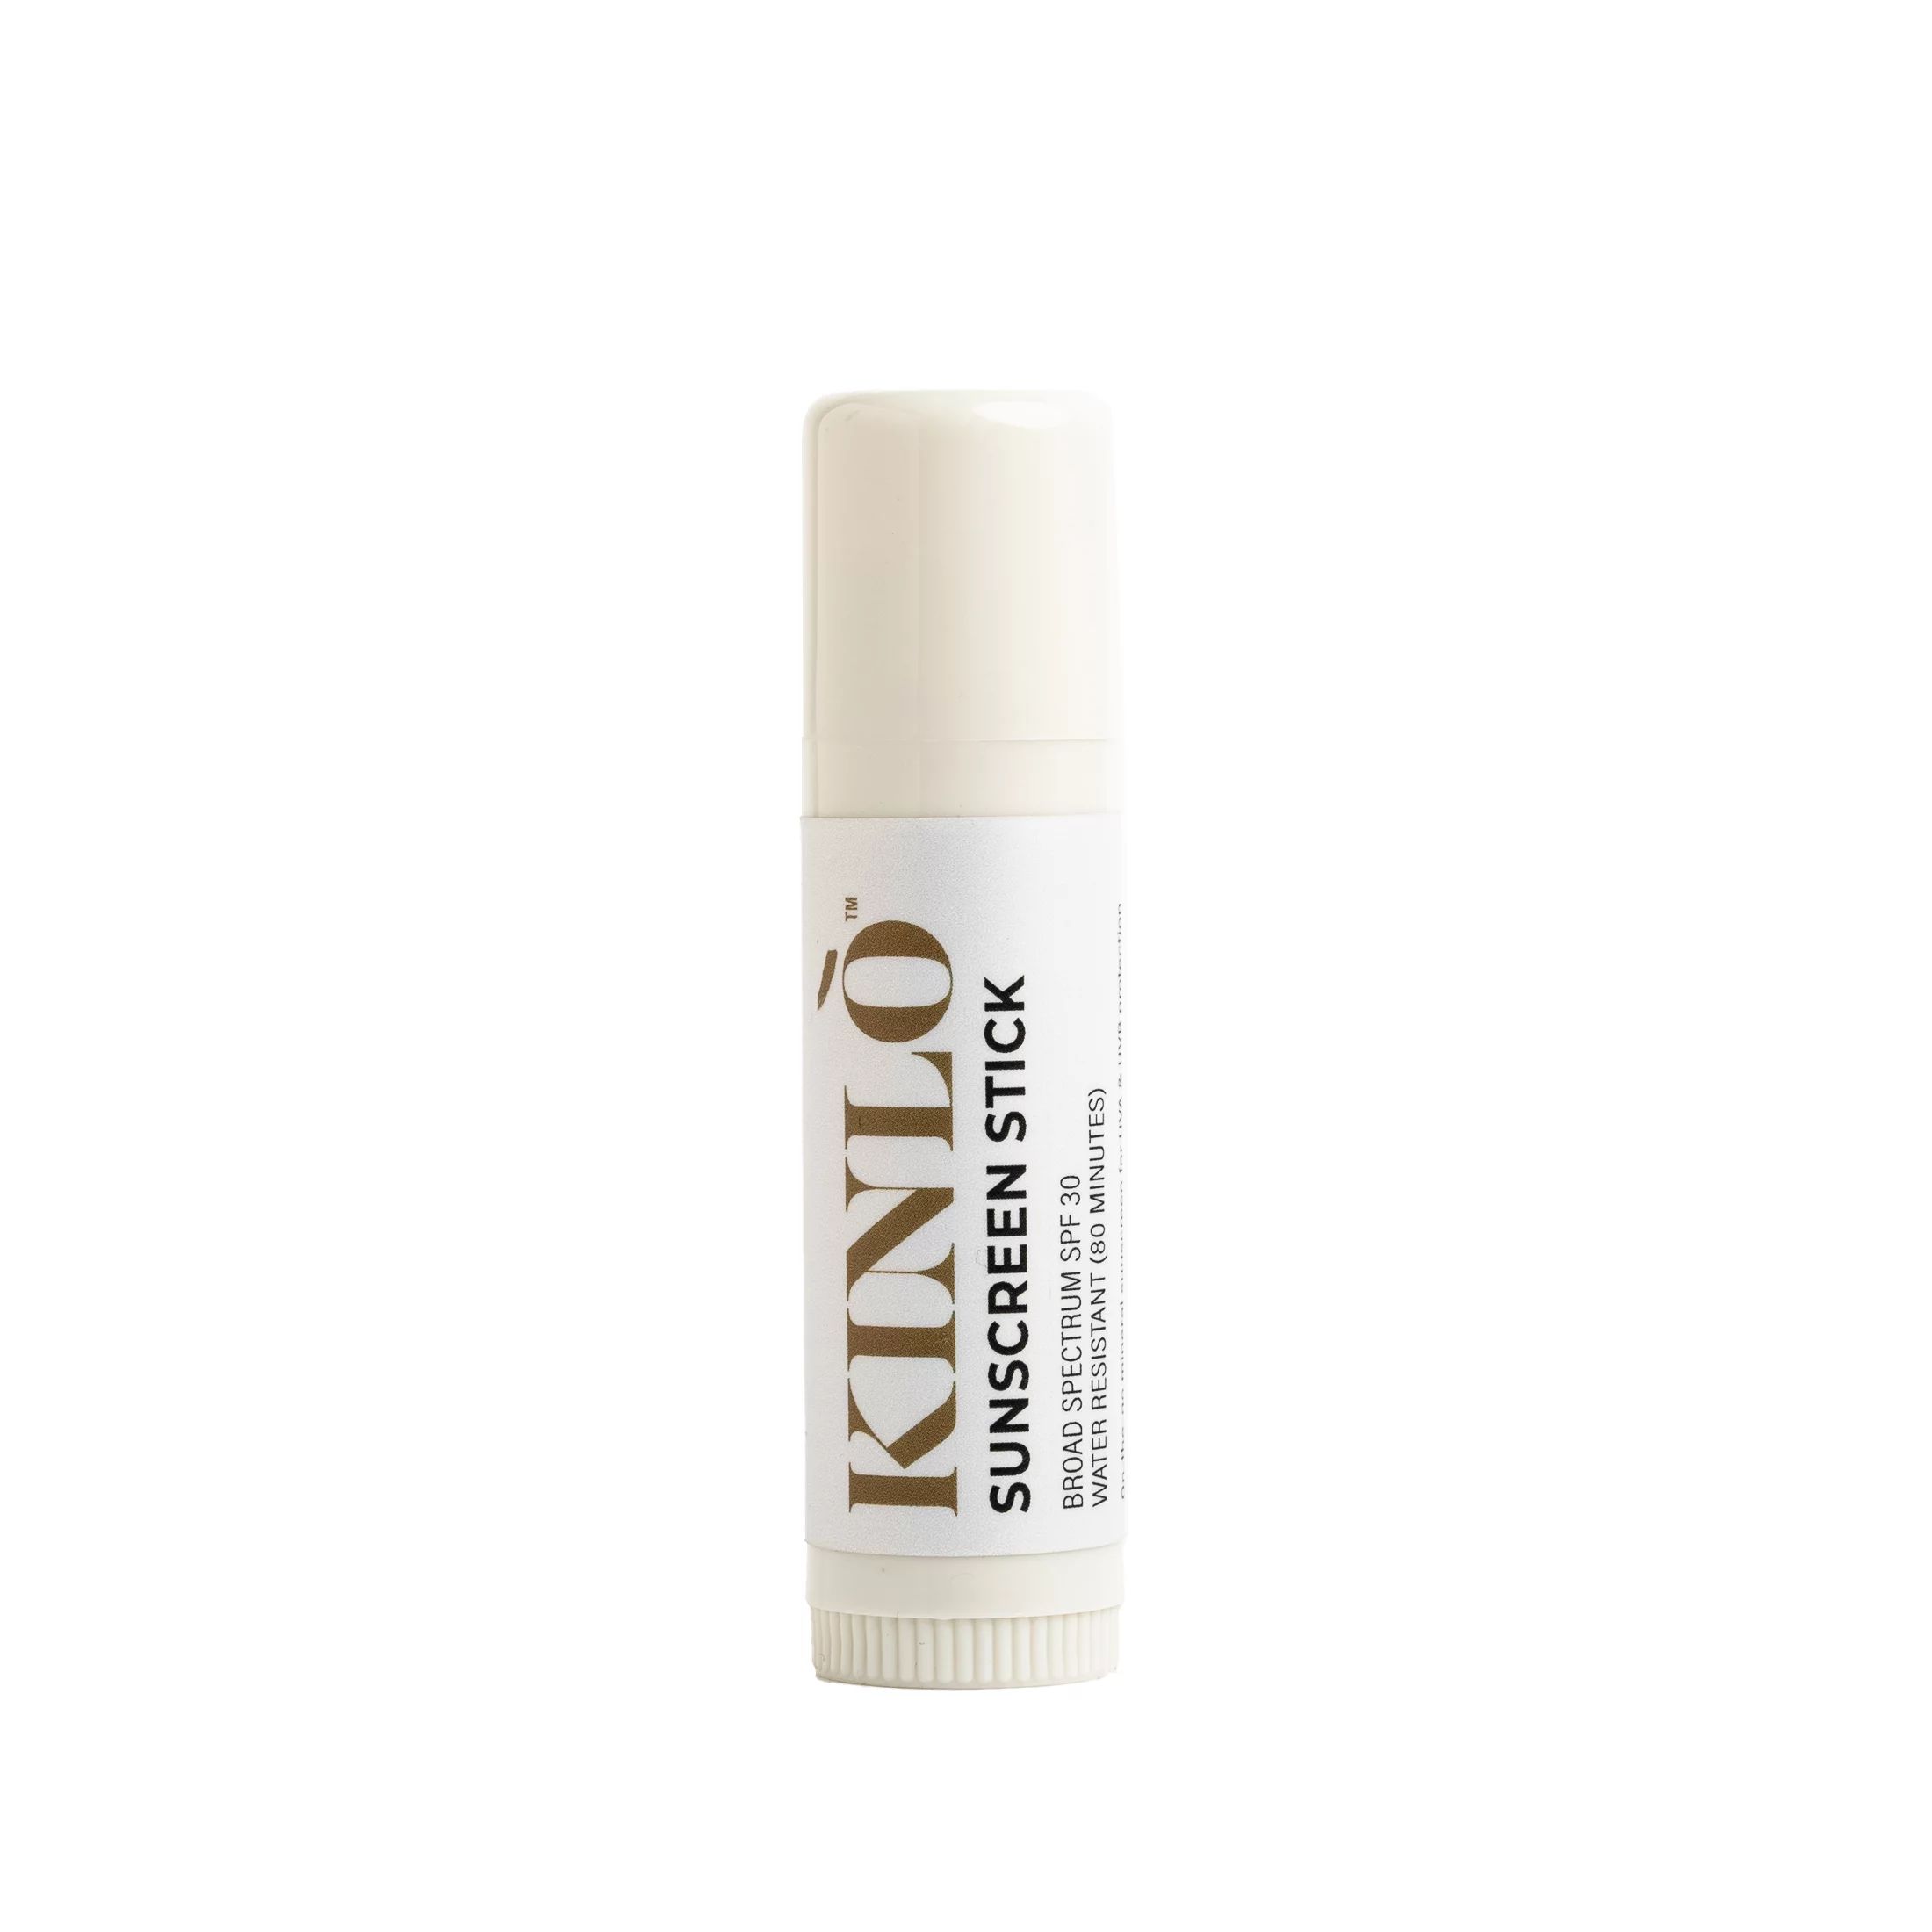 KINLO Water Resistant Sunscreen Stick for Face, Body, and Shoulders Broad Spectrum SPF 30 0.5oz -... | Walmart (US)